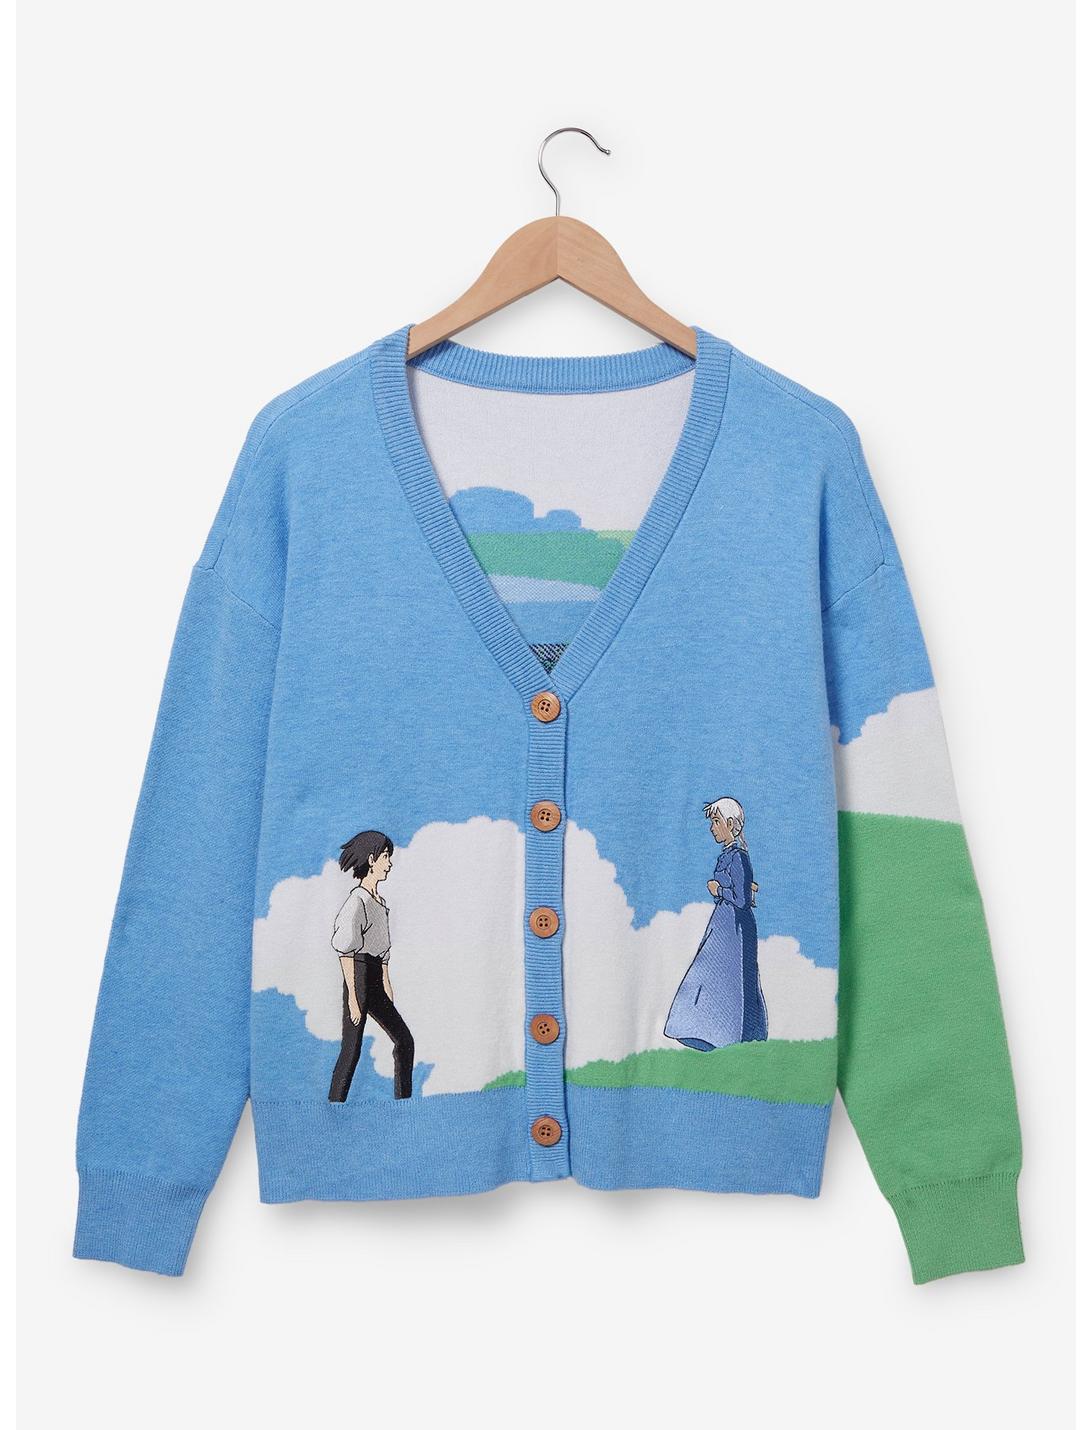 Studio Ghibli Howl's Moving Castle Sophie & Howl Women's Cardigan - BoxLunch Exclusive, BLUE, hi-res